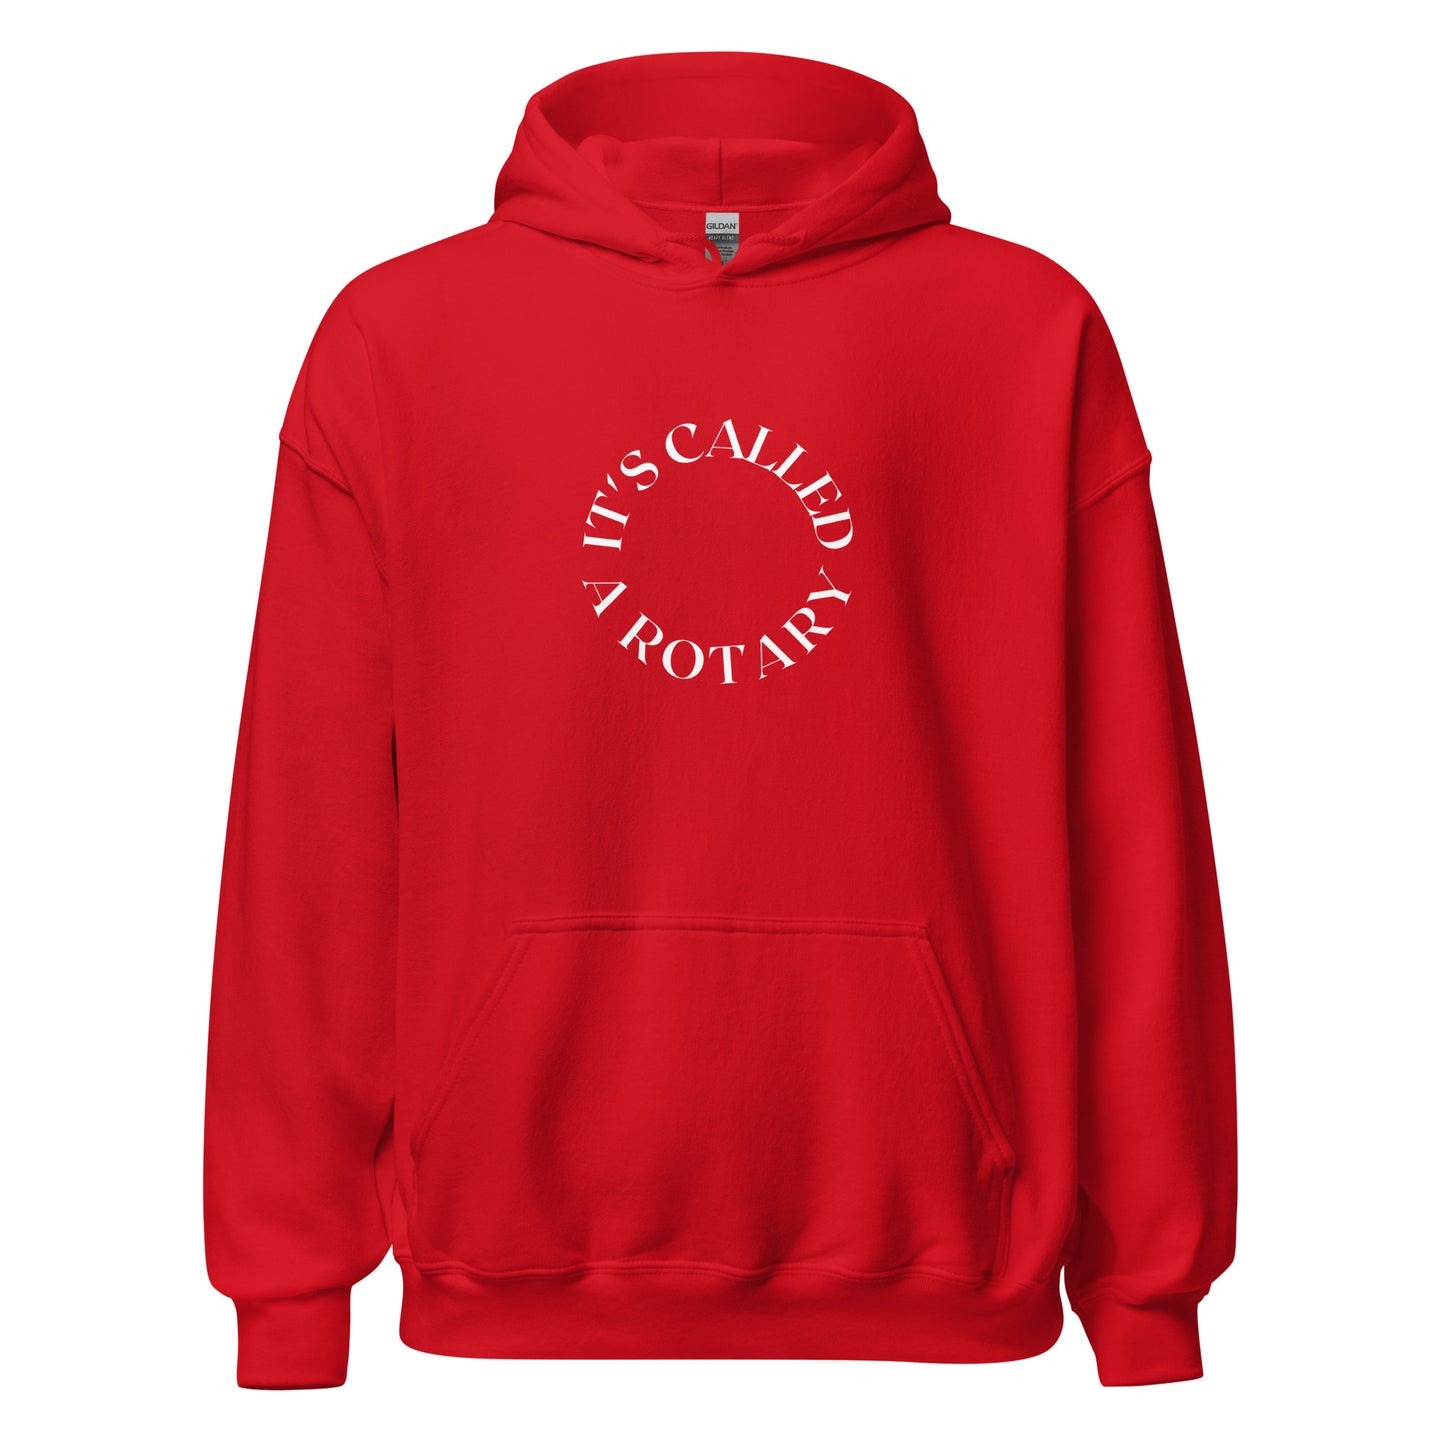 red hoodie that saying "it's called a rotary" in white lettering shaped in a circle